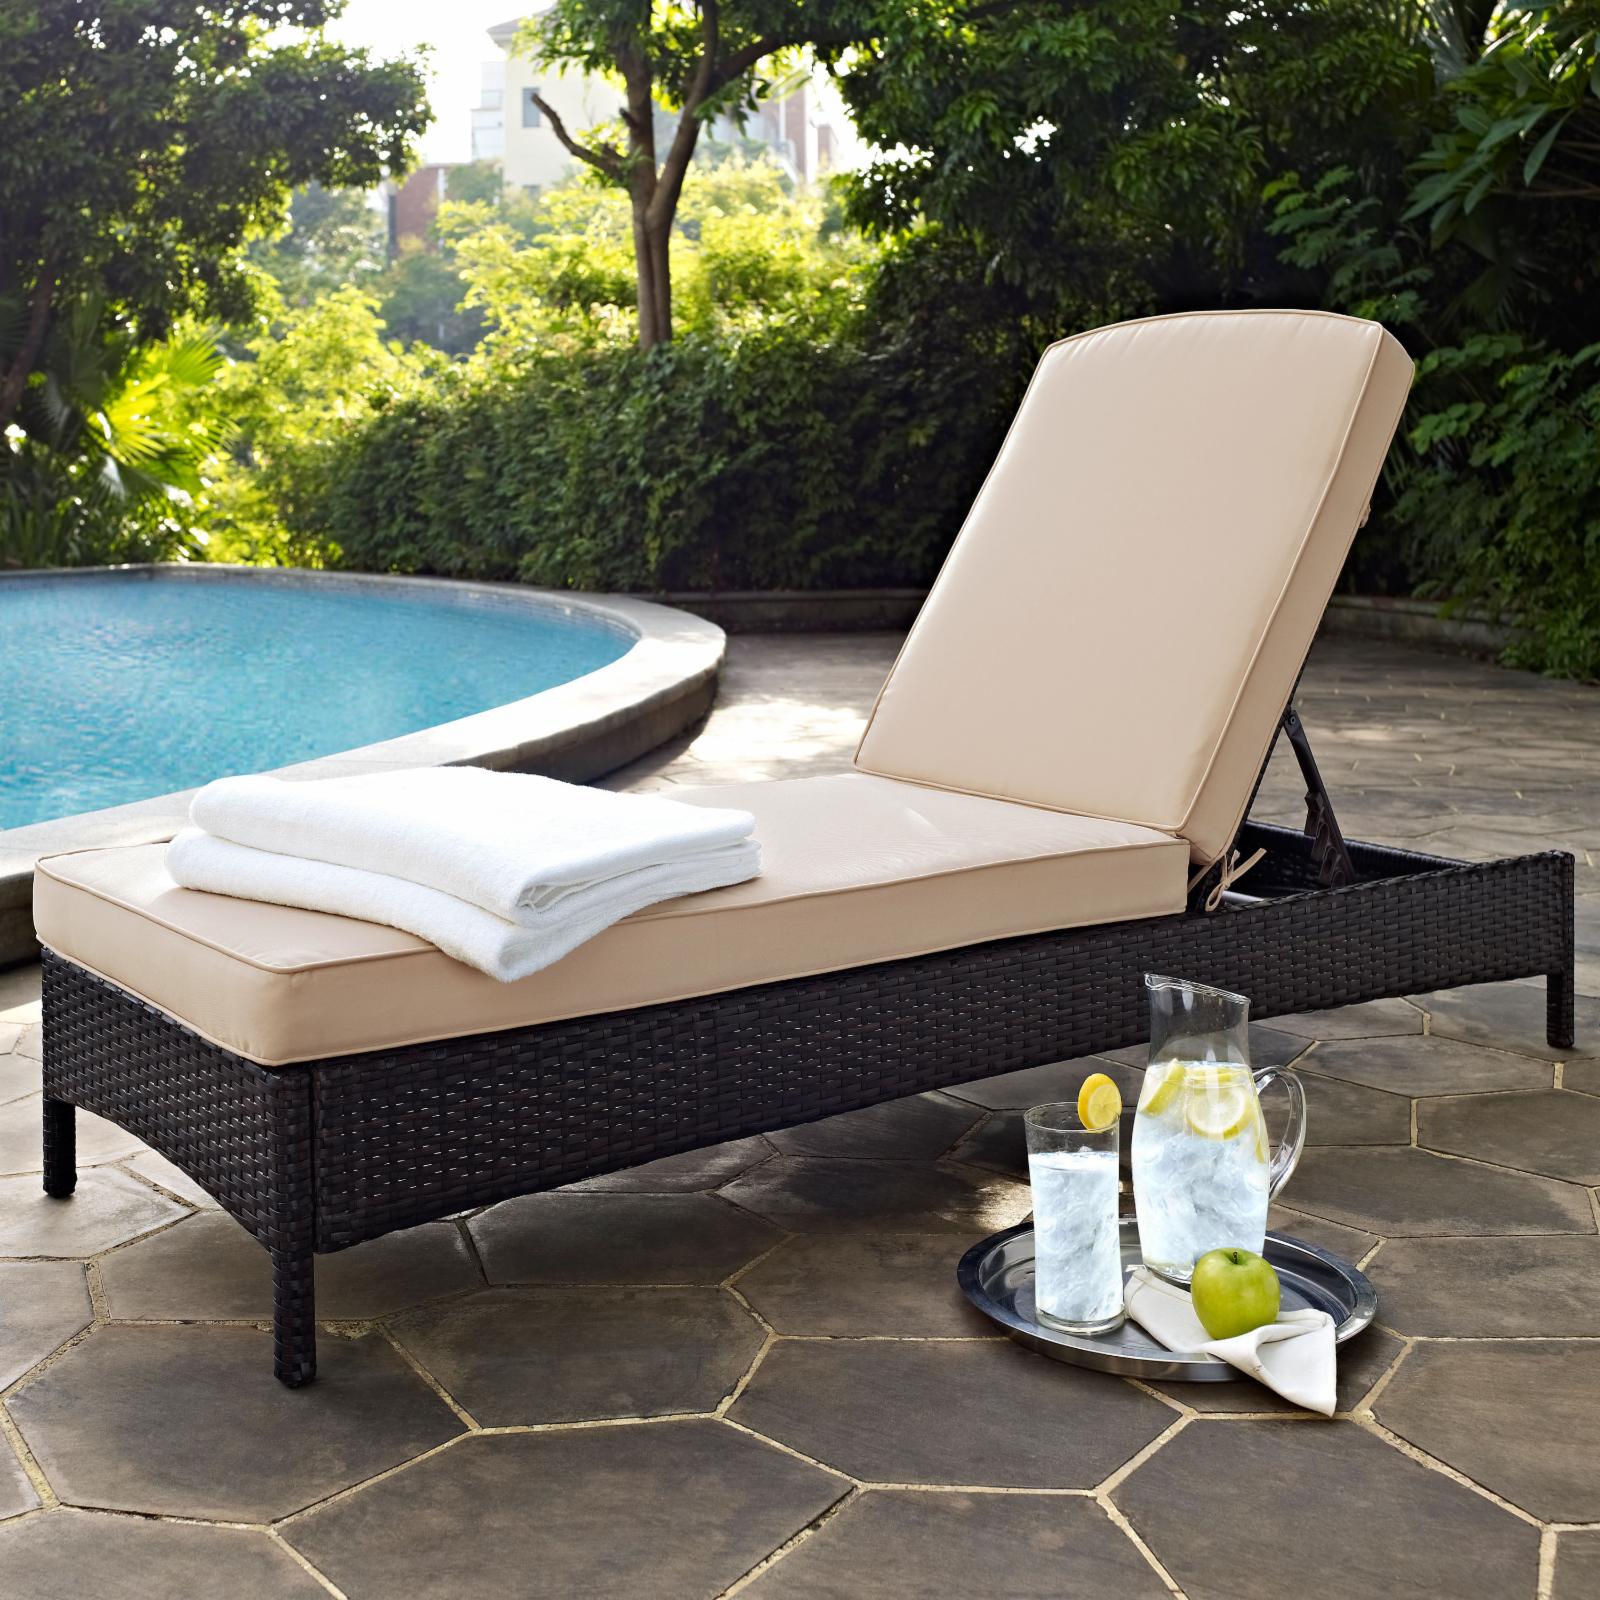 Crosley Palm Harbor Wicker Patio Chaise Lounge in Brown and Sand - image 5 of 9